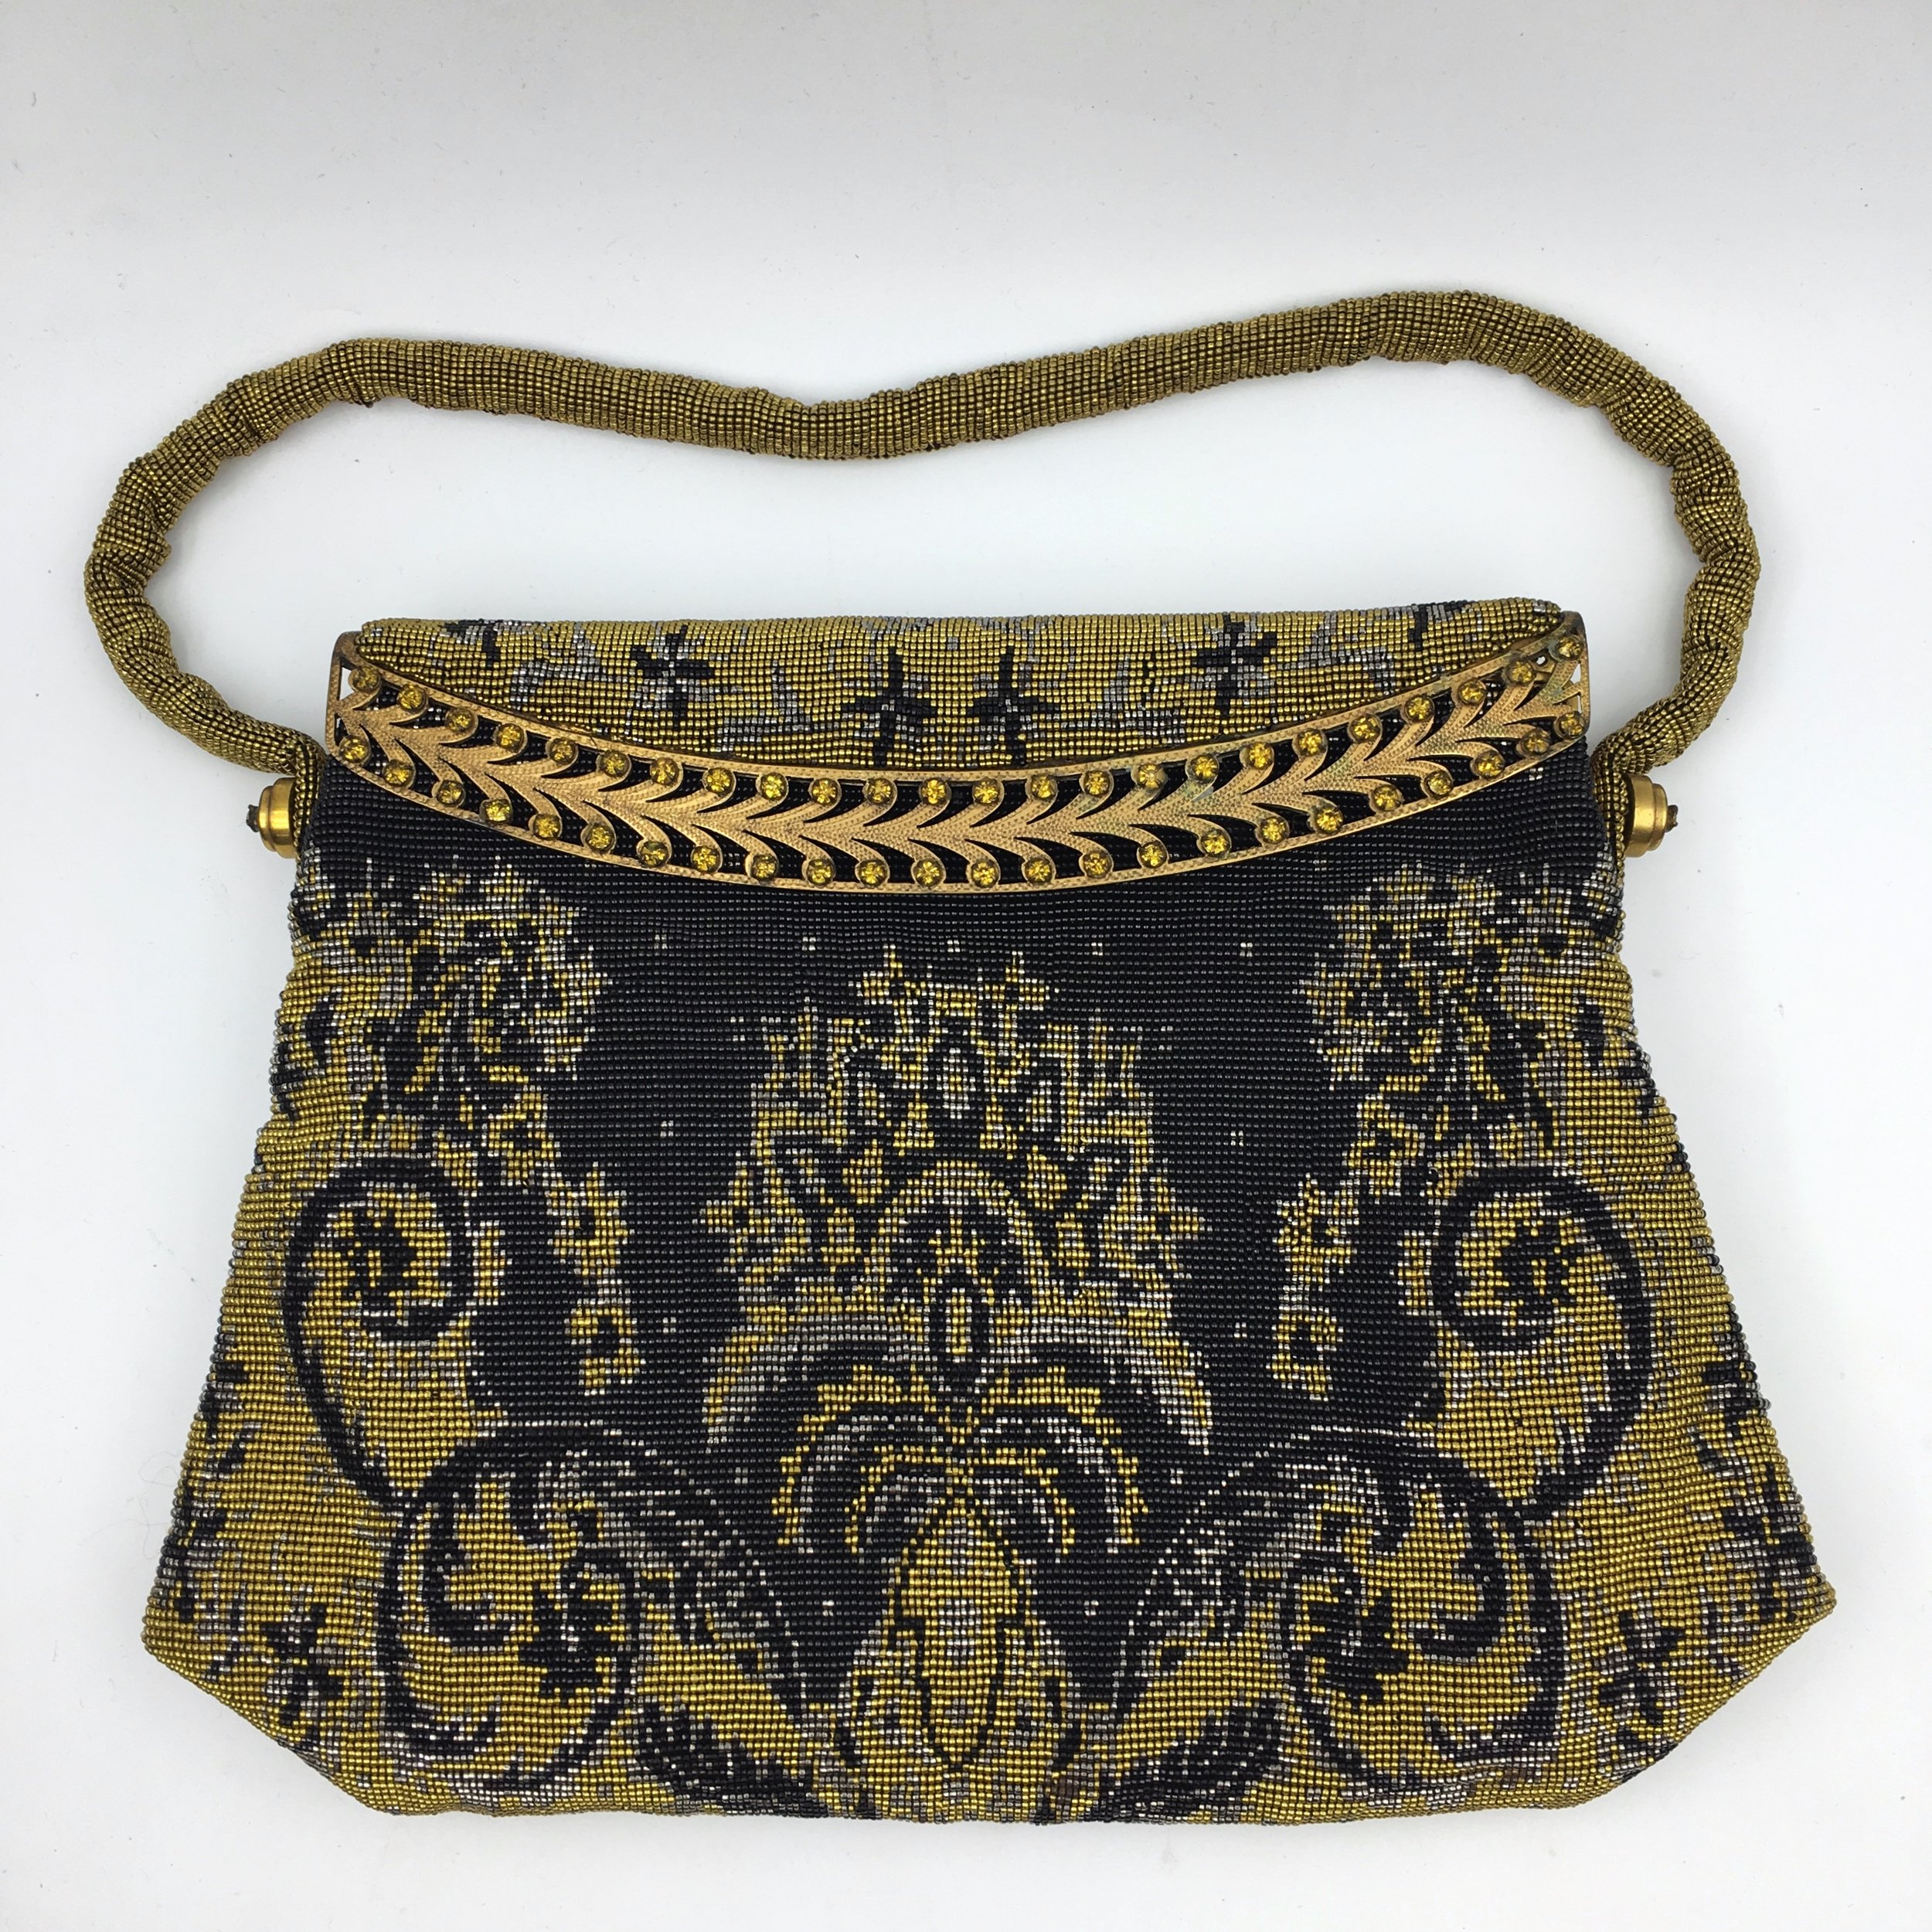 Vintage Beaded Evening Bag Hand Made in France